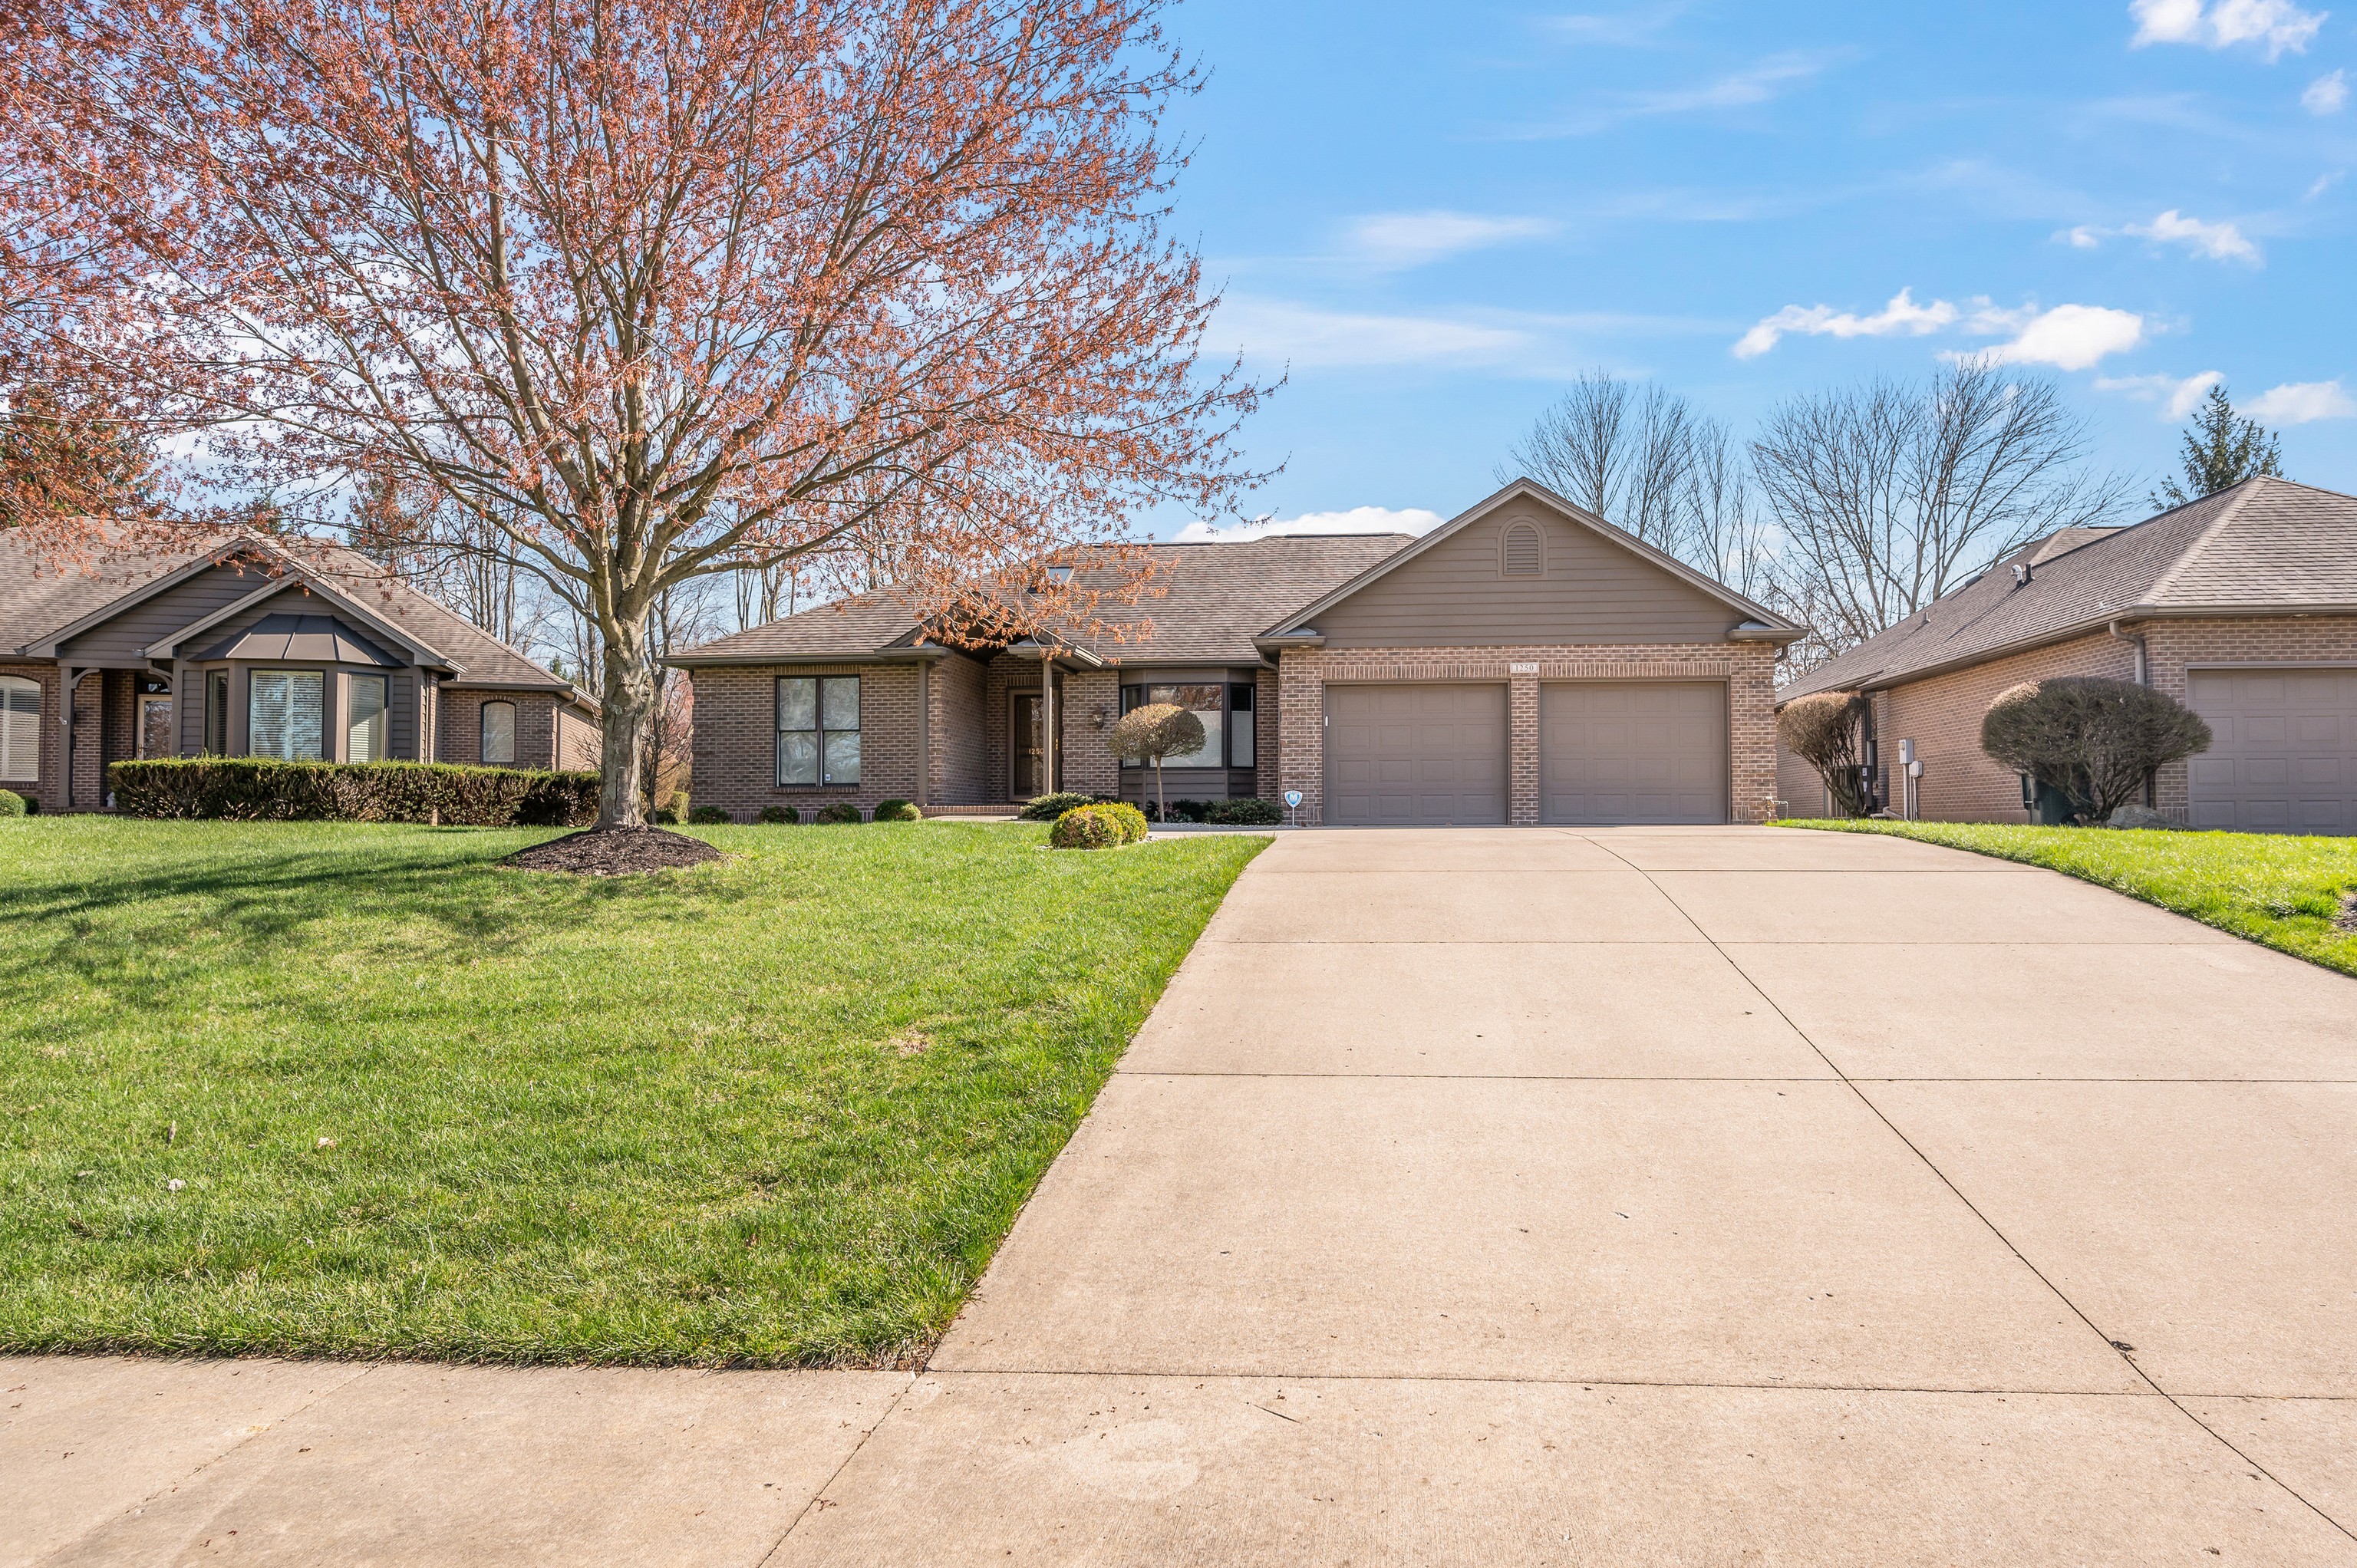 2. 1250 Pintail Court